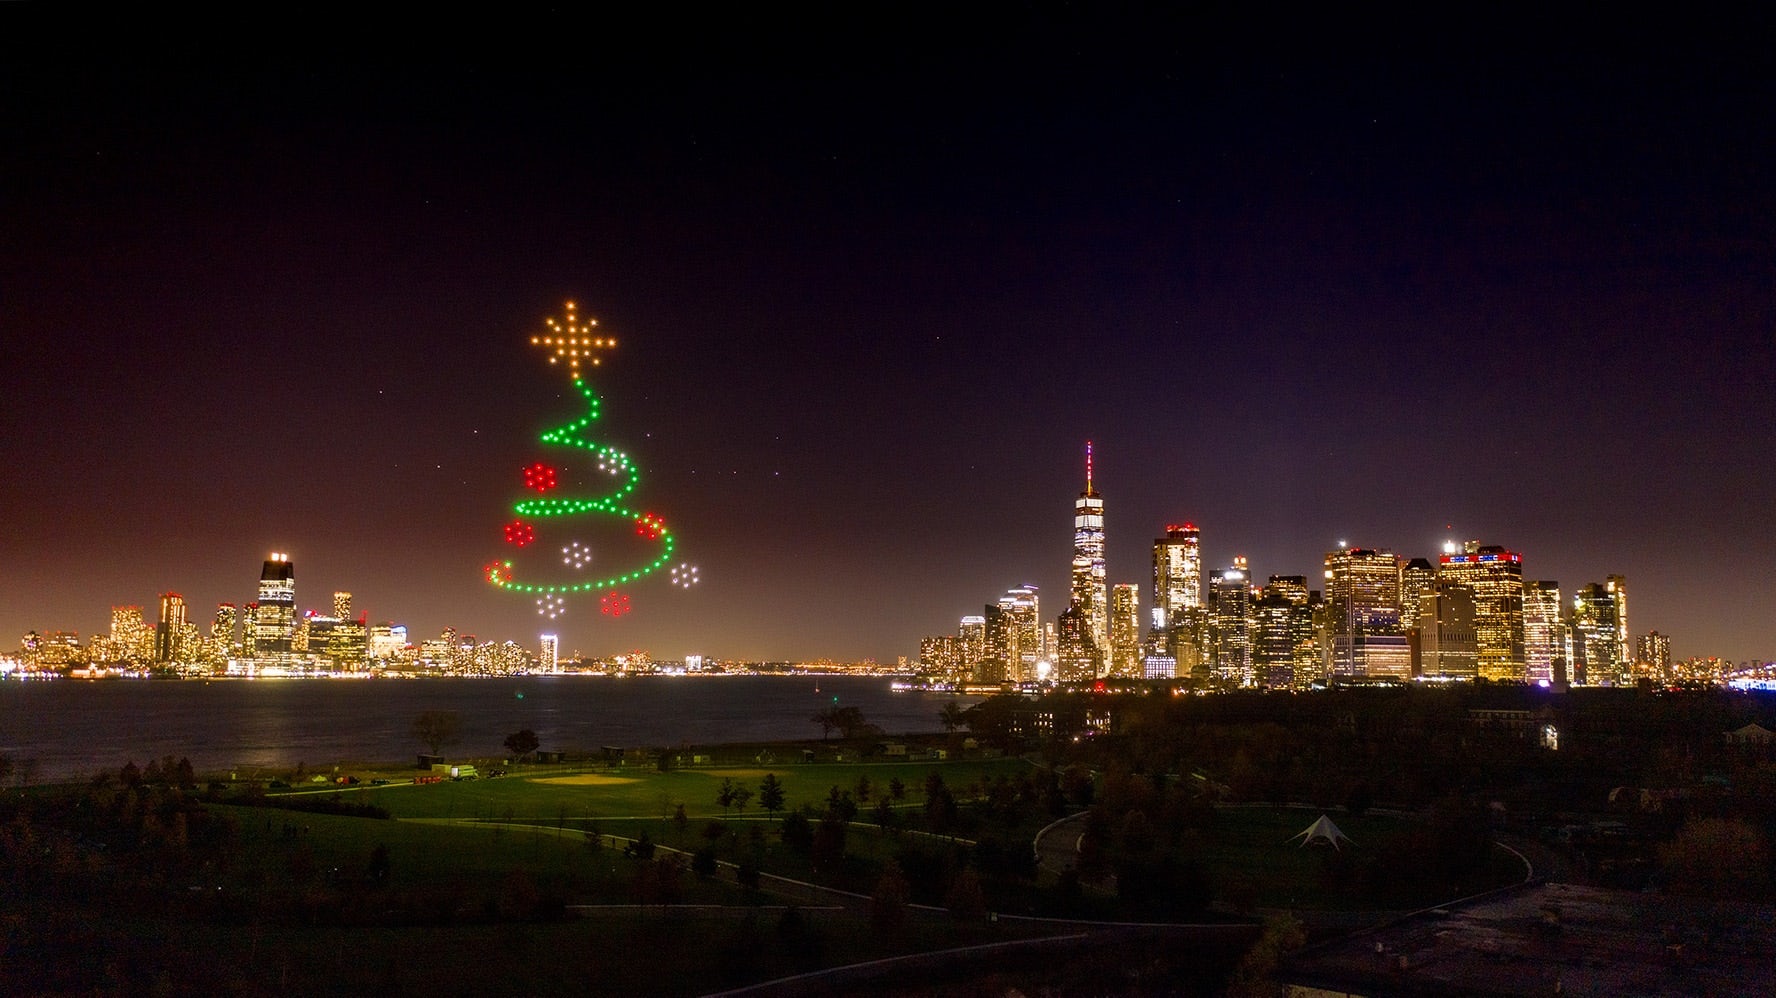 Verge Aero flies a Christmas tree over Governors Island for the holidays